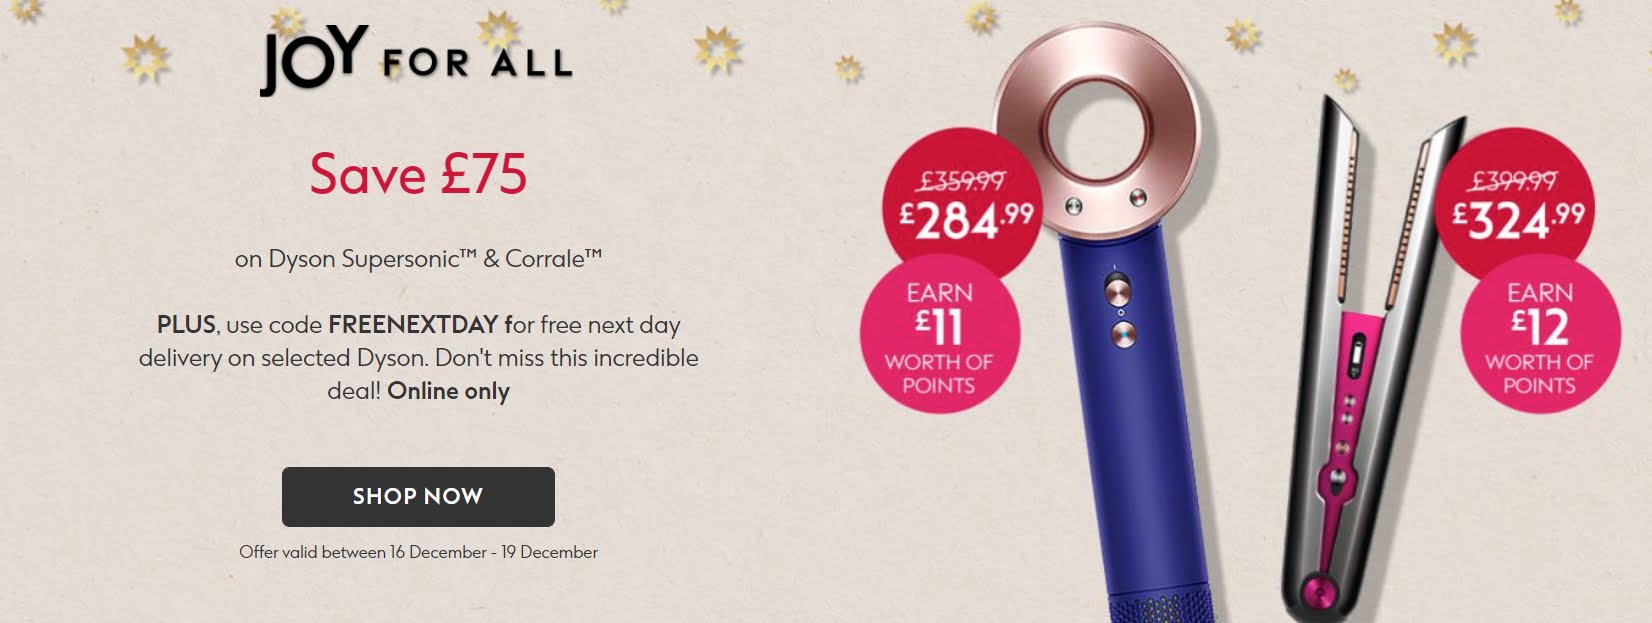 Save £75 on the Dyson Supersonic and Corrale at Boots